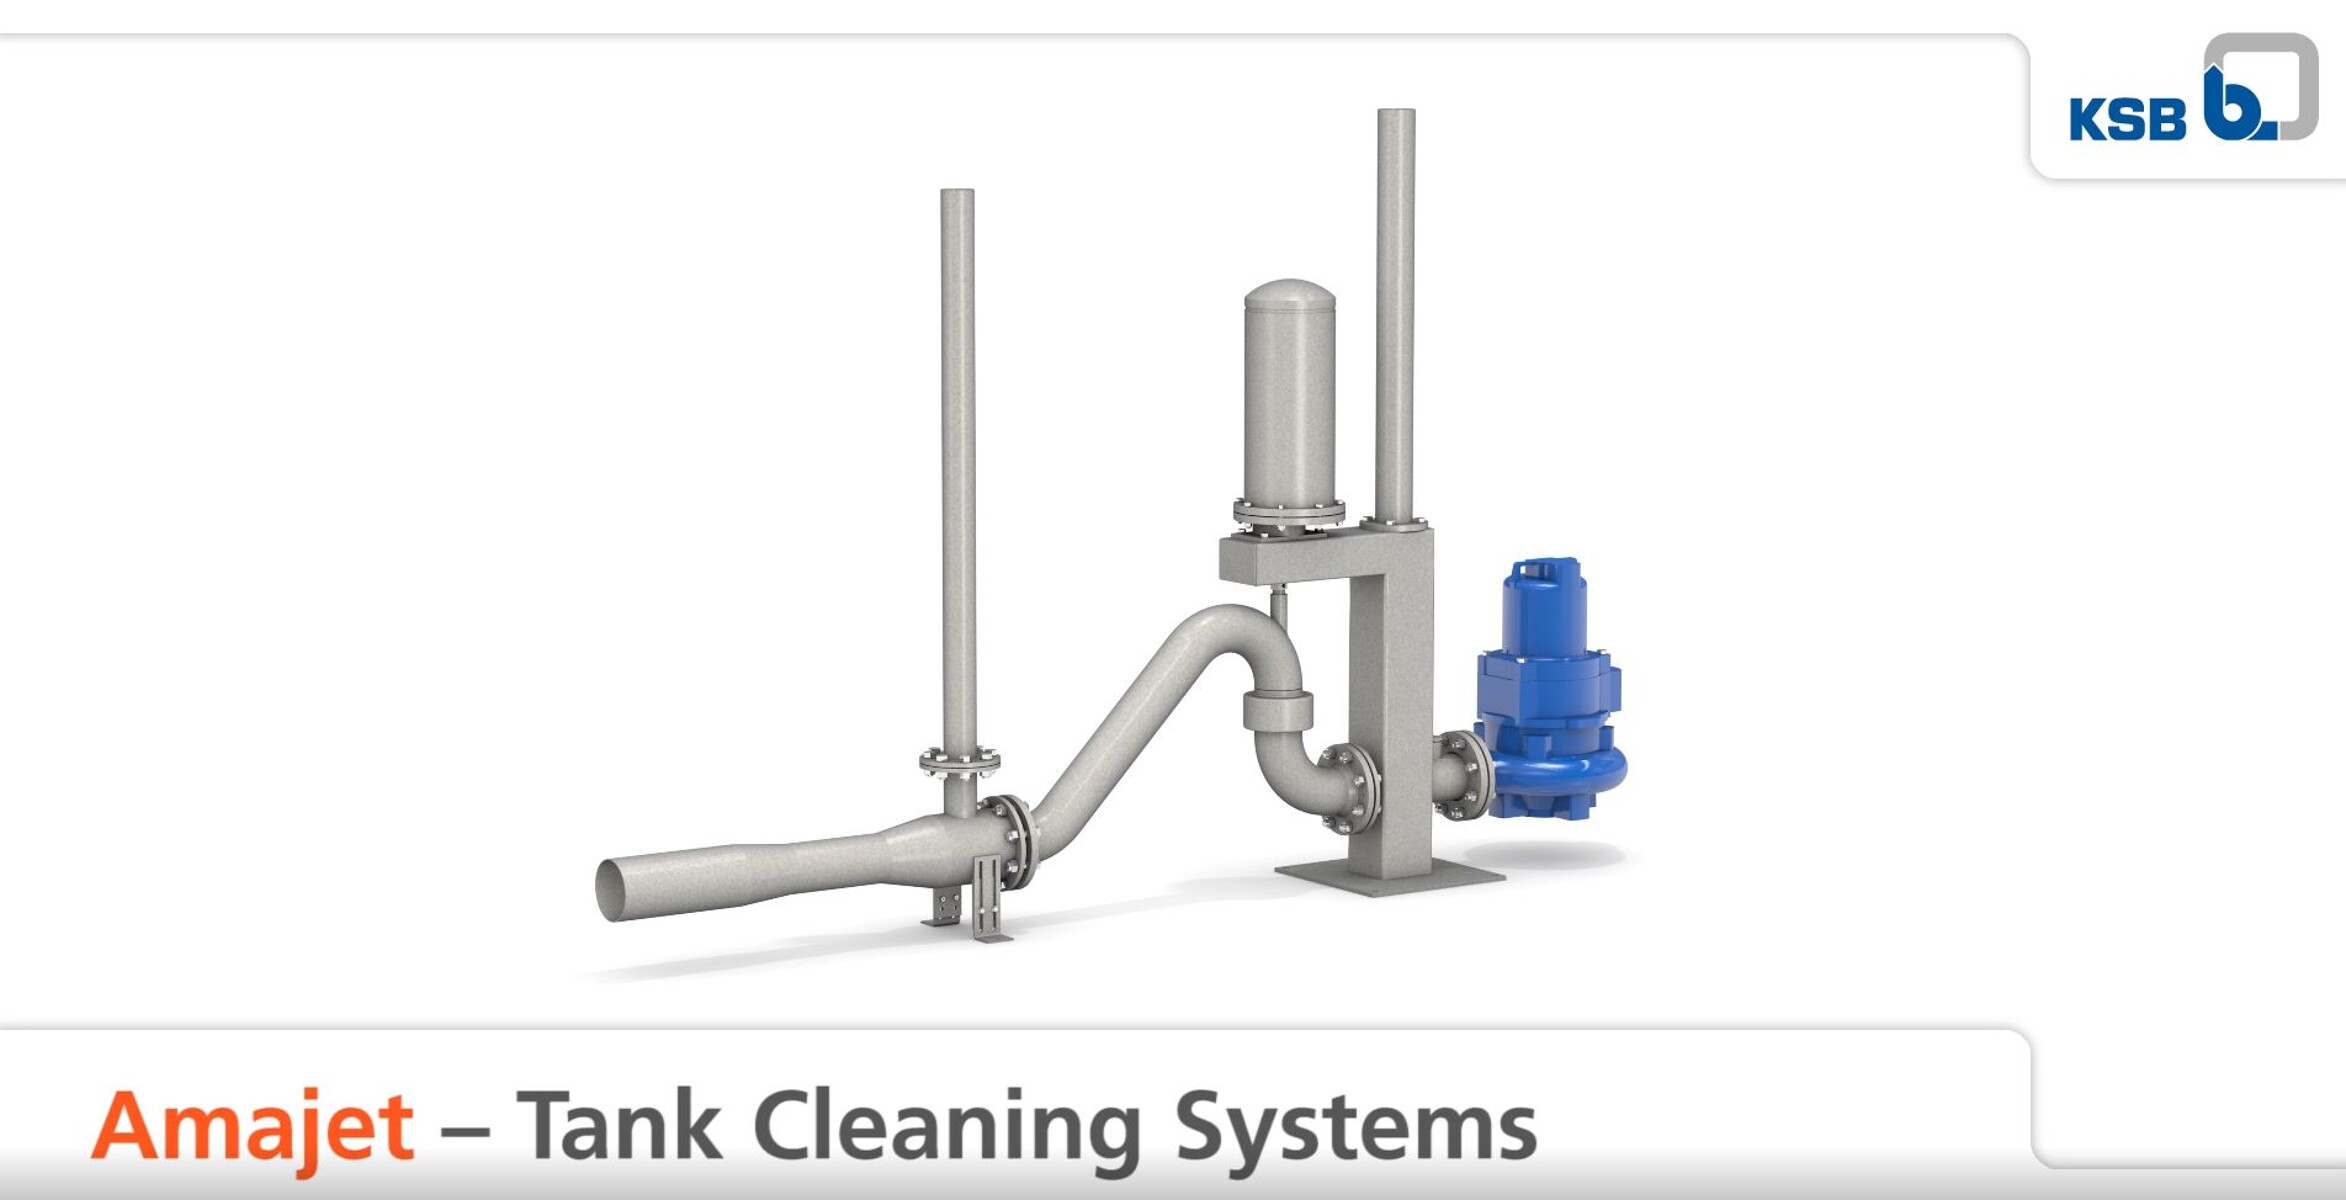 Amajet - Tank Cleaning Systems